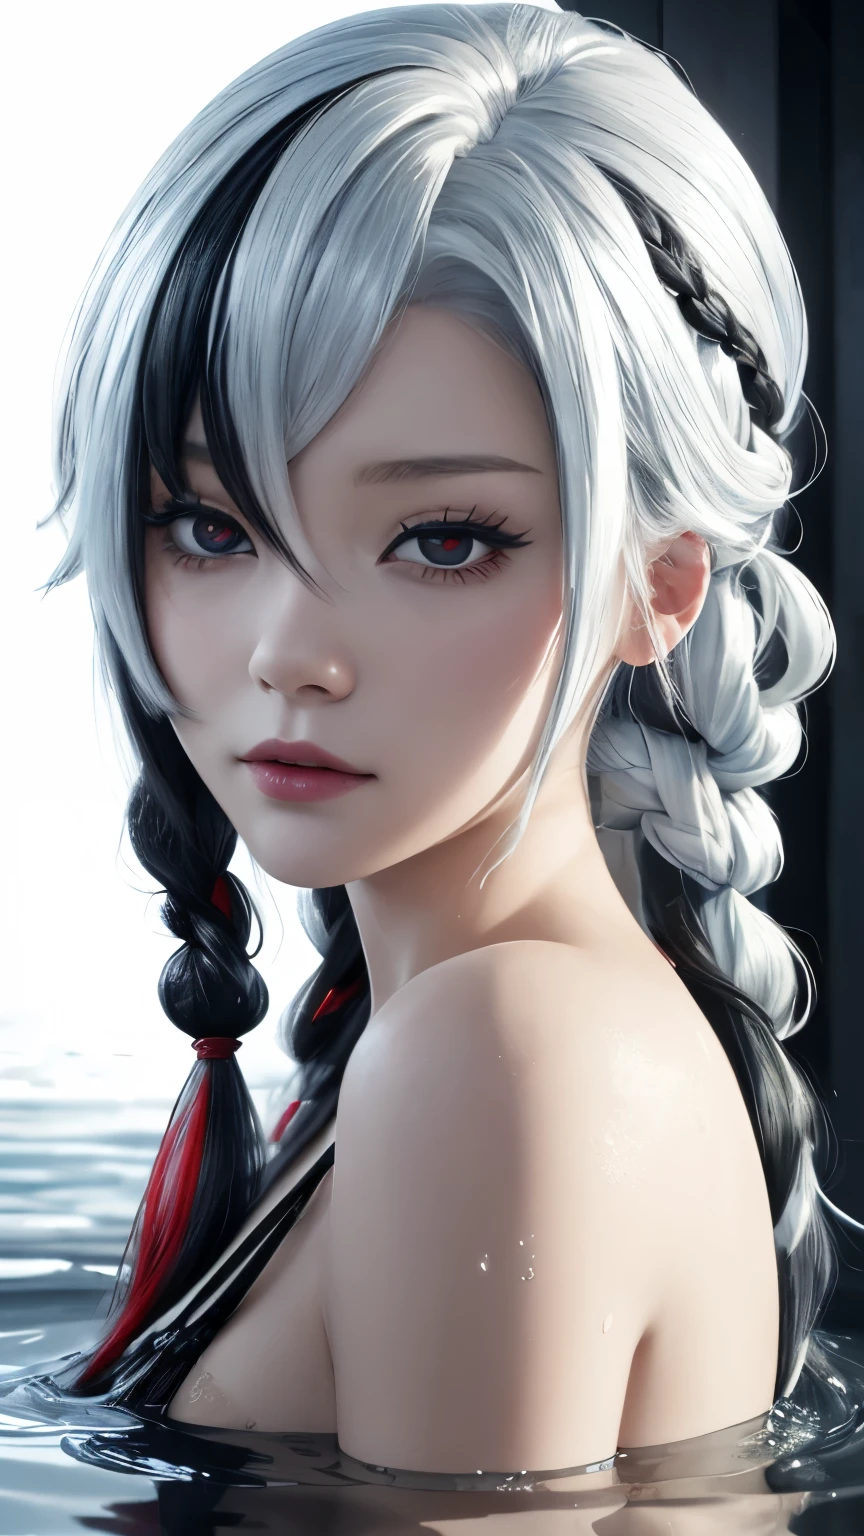 Masterpiece,Photorealism,high resolution,A young girl holding a glass of water,Water splashing on glass,White hair,black hair,Colorful hair,Straight Hair,Long braids,Red eyes,Red X pupils,In realistic style,Gumbi,pretty girl,Simple background,There are bubbles everywhere,